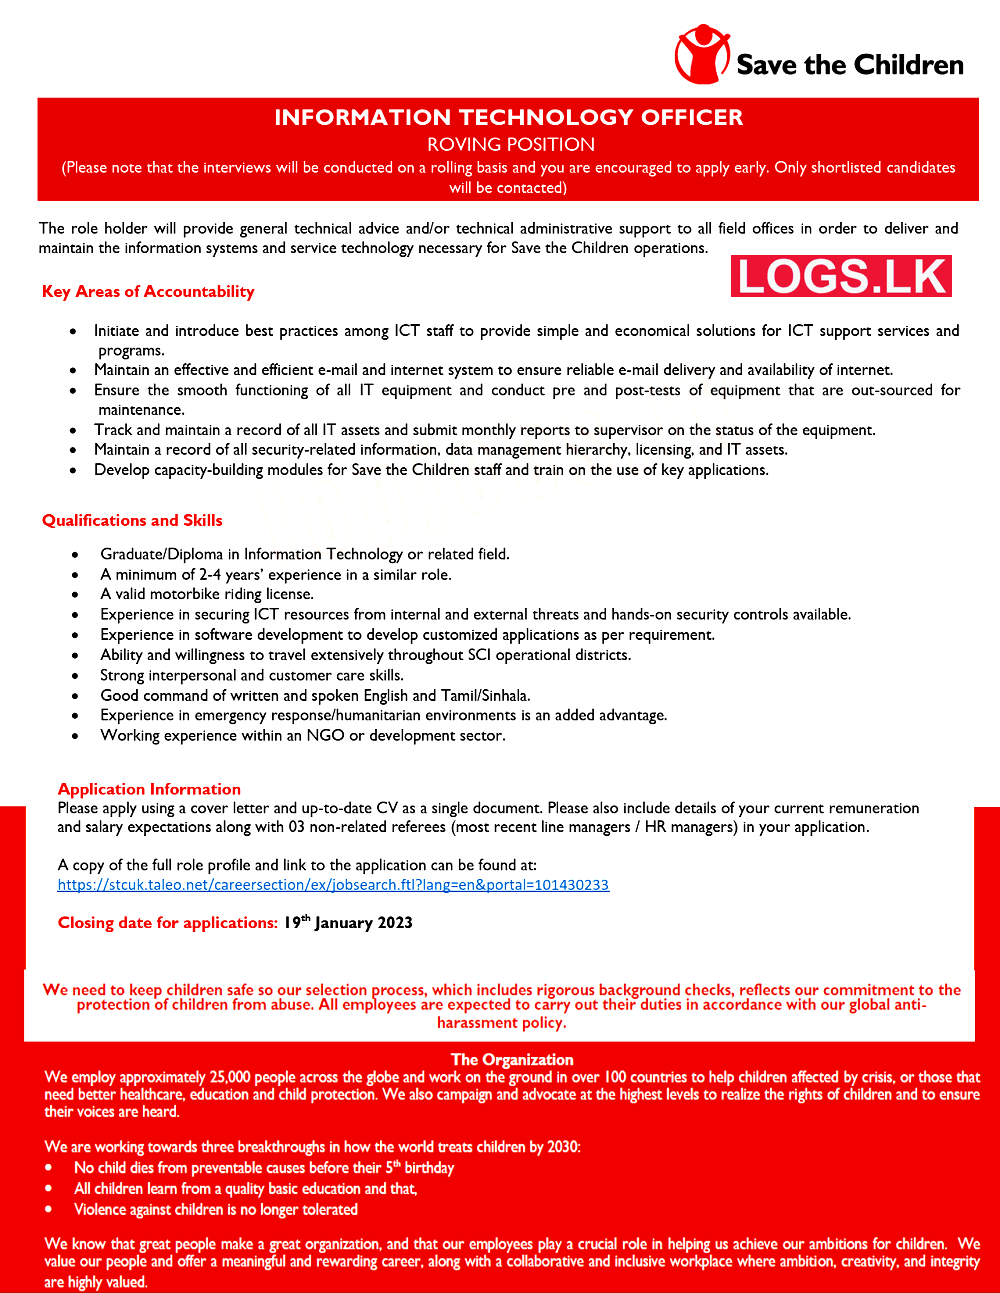 Information Technology Officer - Save the Children Vacancies 2023 Apply Online